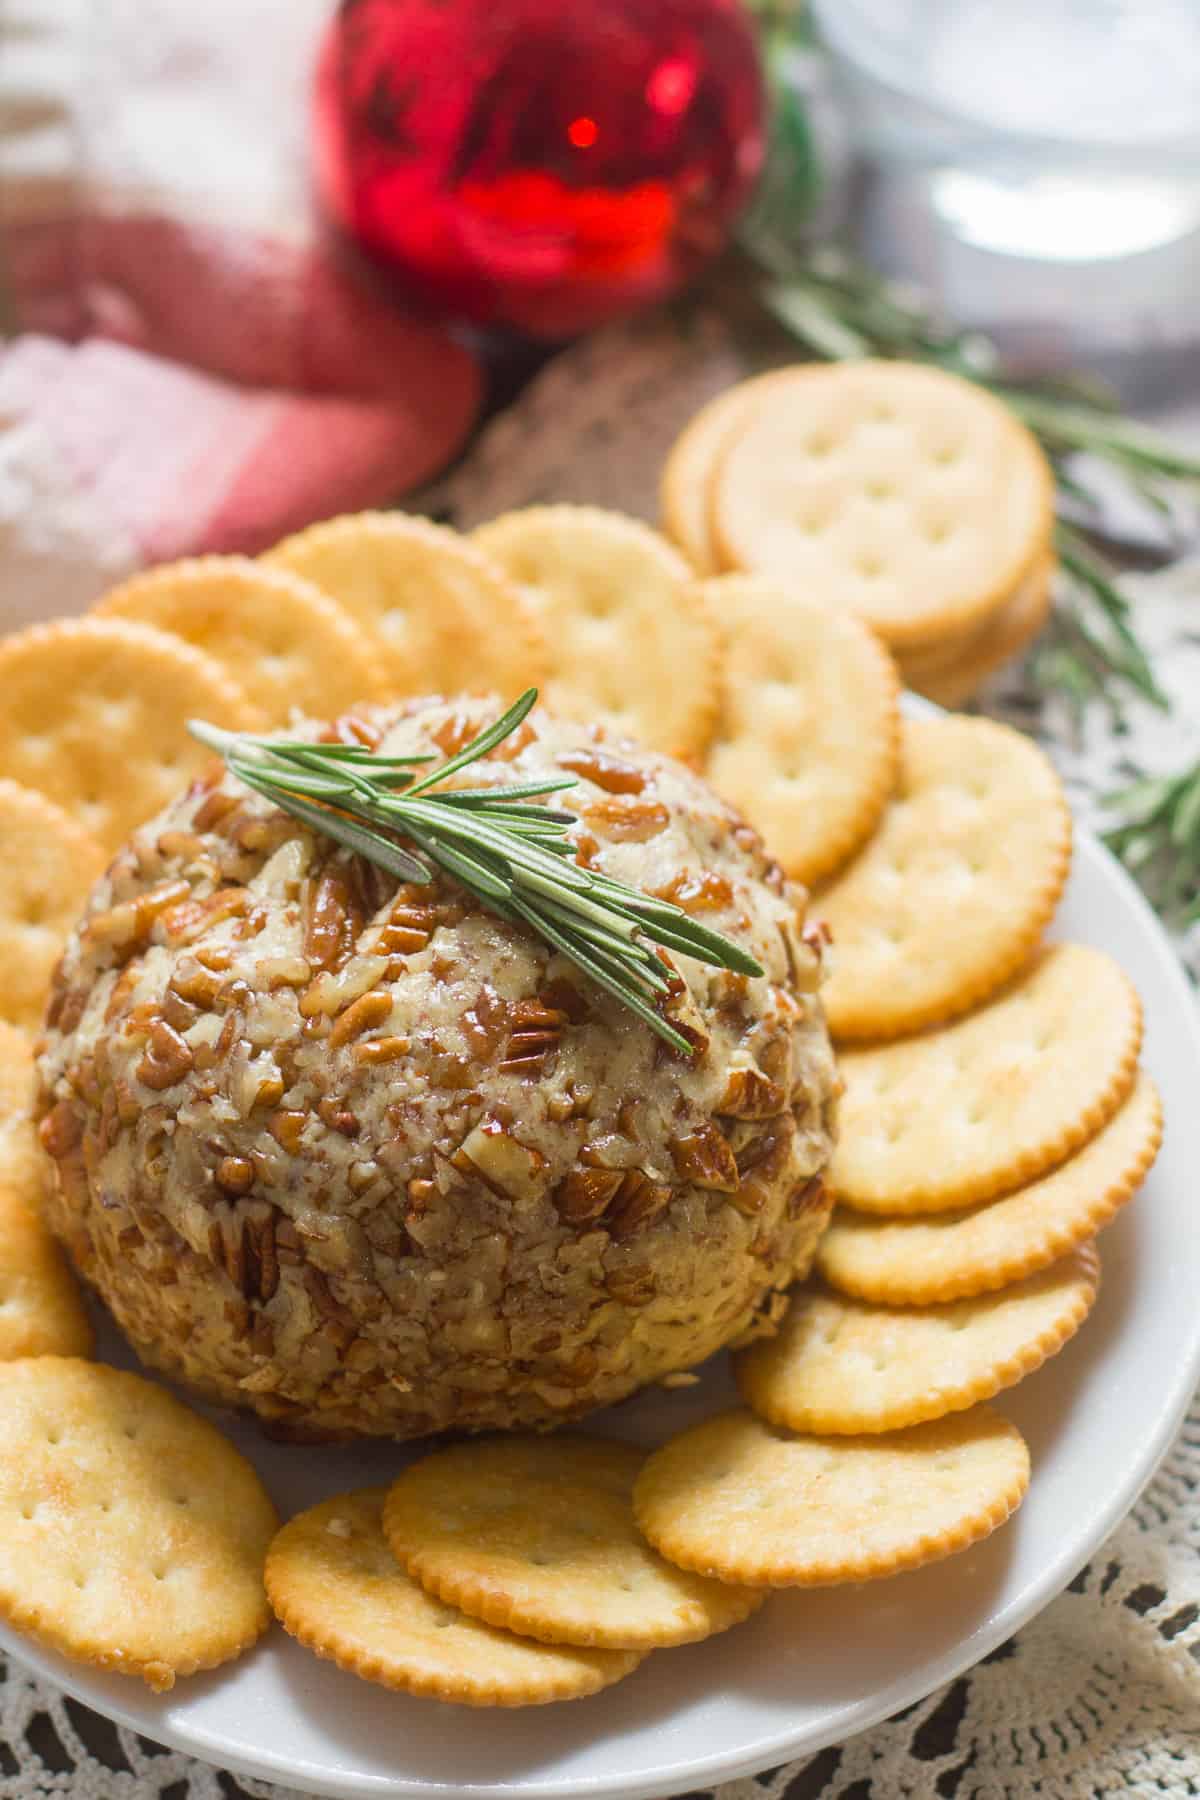 Vegan Cheese Ball Surrounded By Crackers with a Sprig of Rosemary on Top